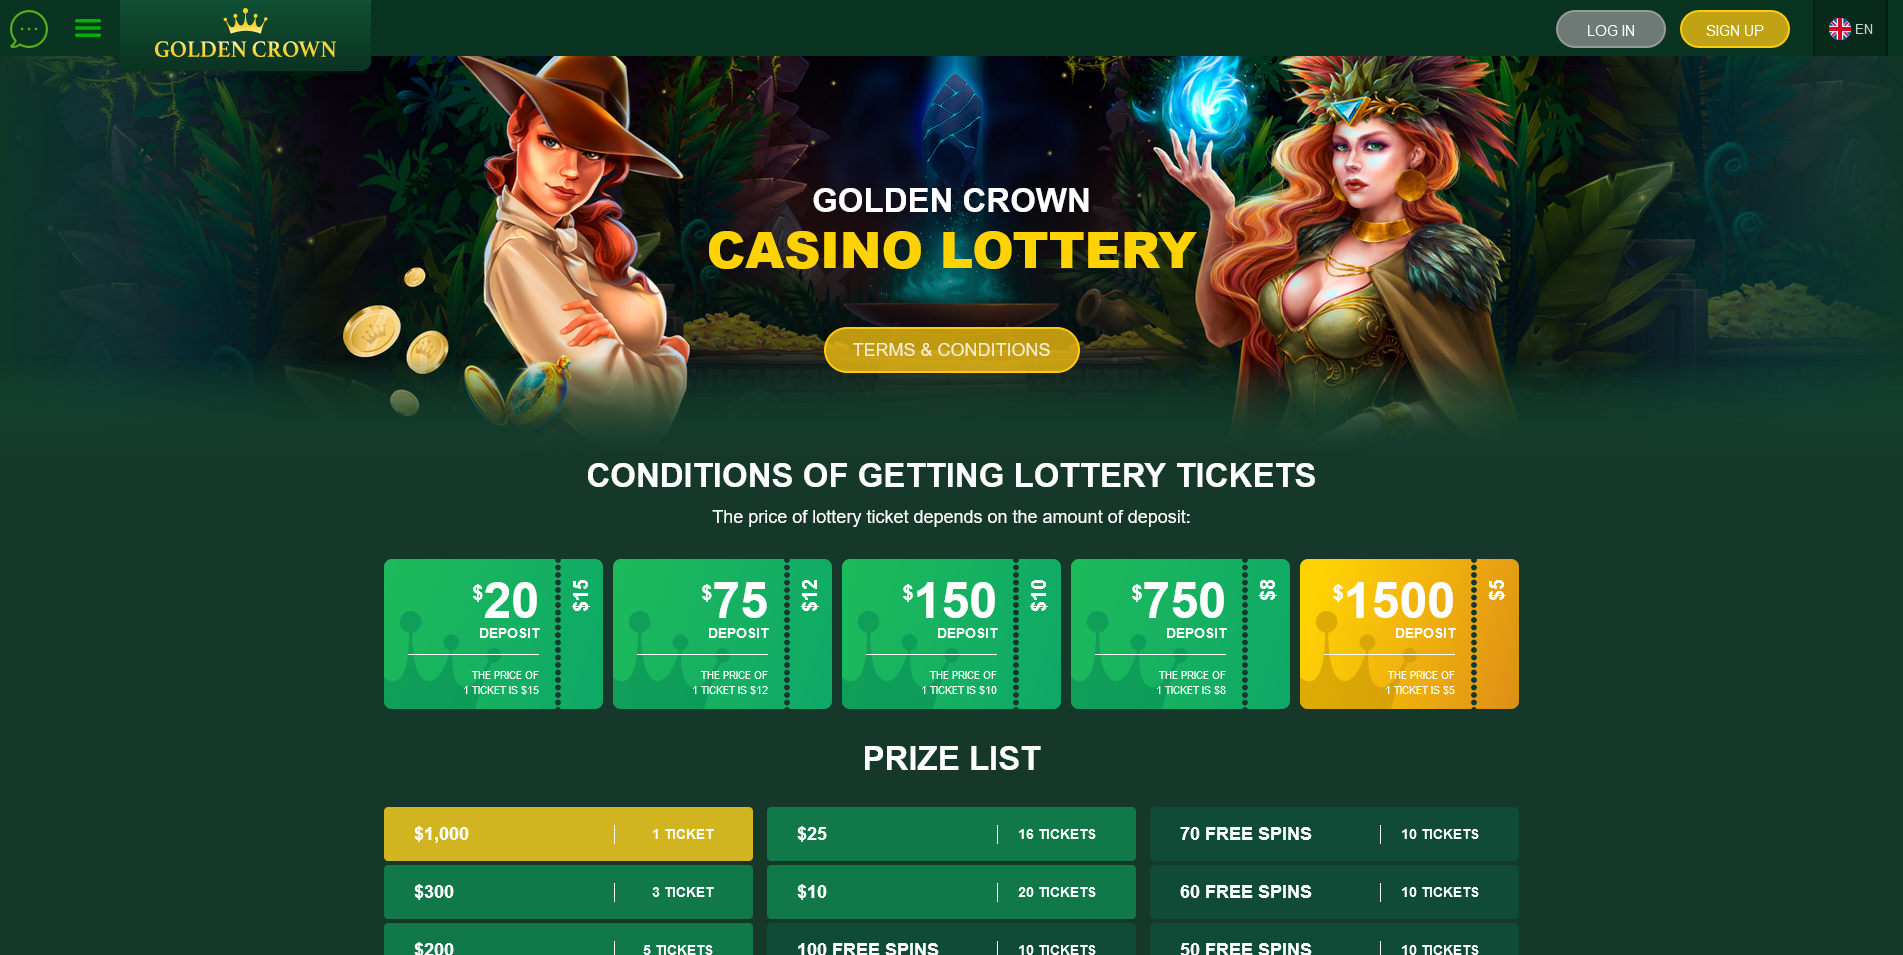 Screenshot of the Golden Crown Casino lottery page